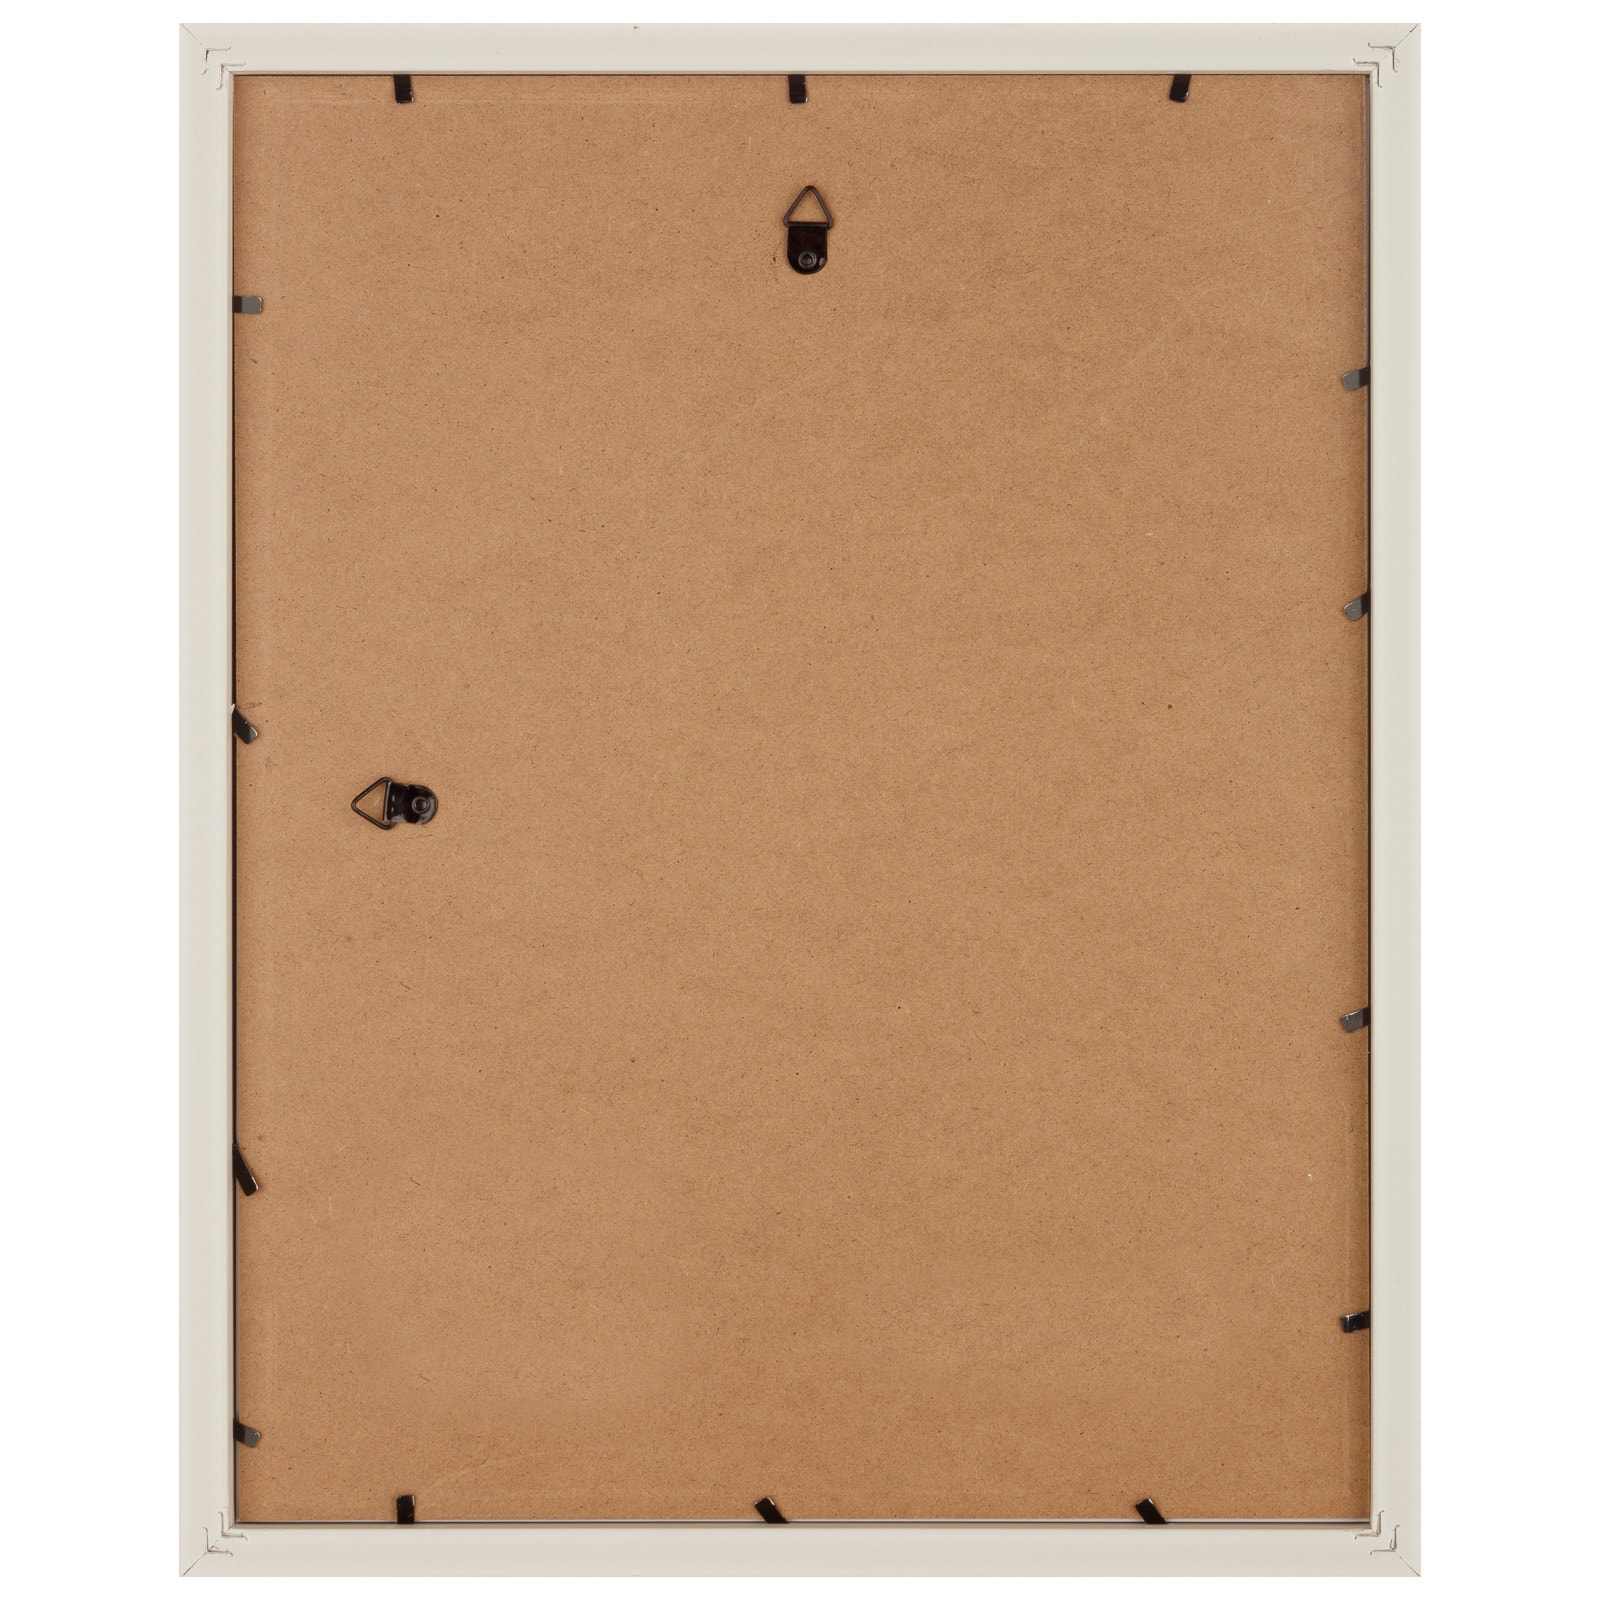 8 Pack: White 8&#x22; x 10&#x22; Frame with Mat, Aspect by Studio D&#xE9;cor&#xAE;